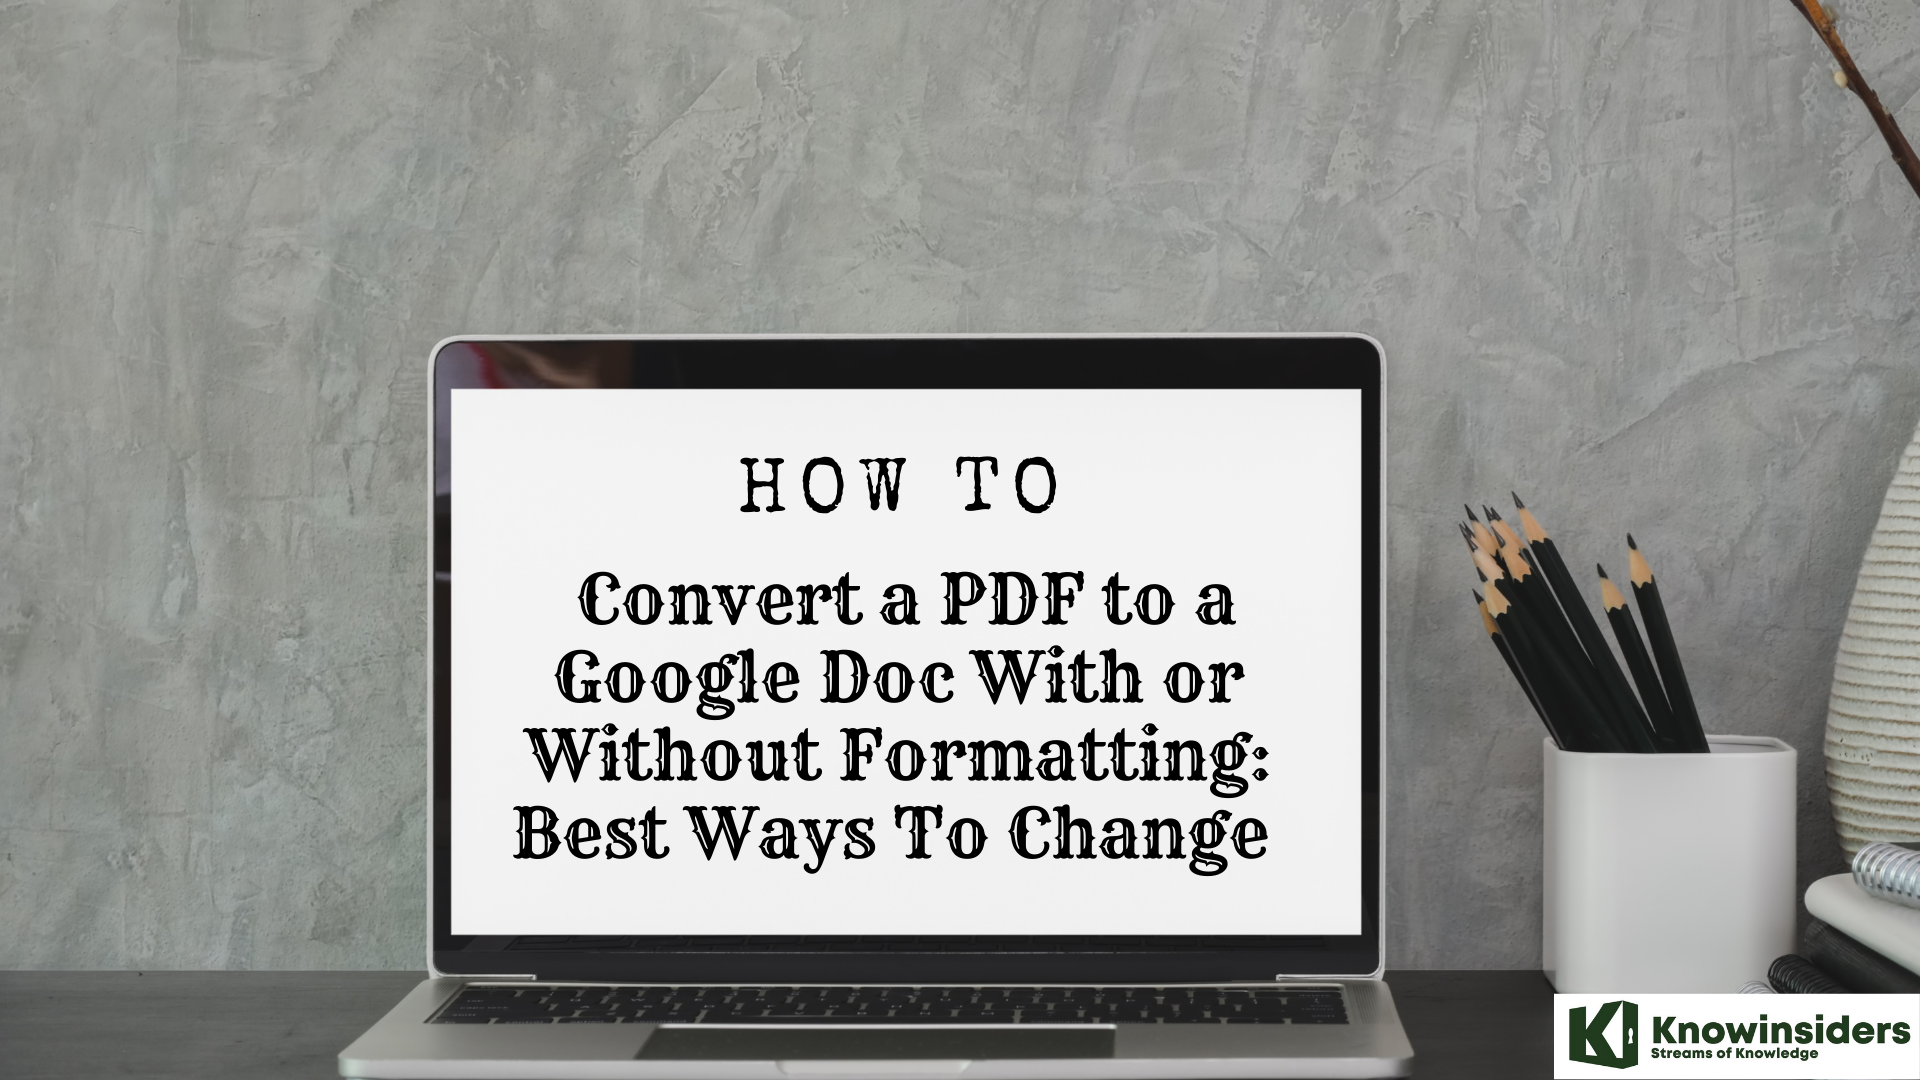 How to Convert a PDF to a Google Doc With or Without Formatting